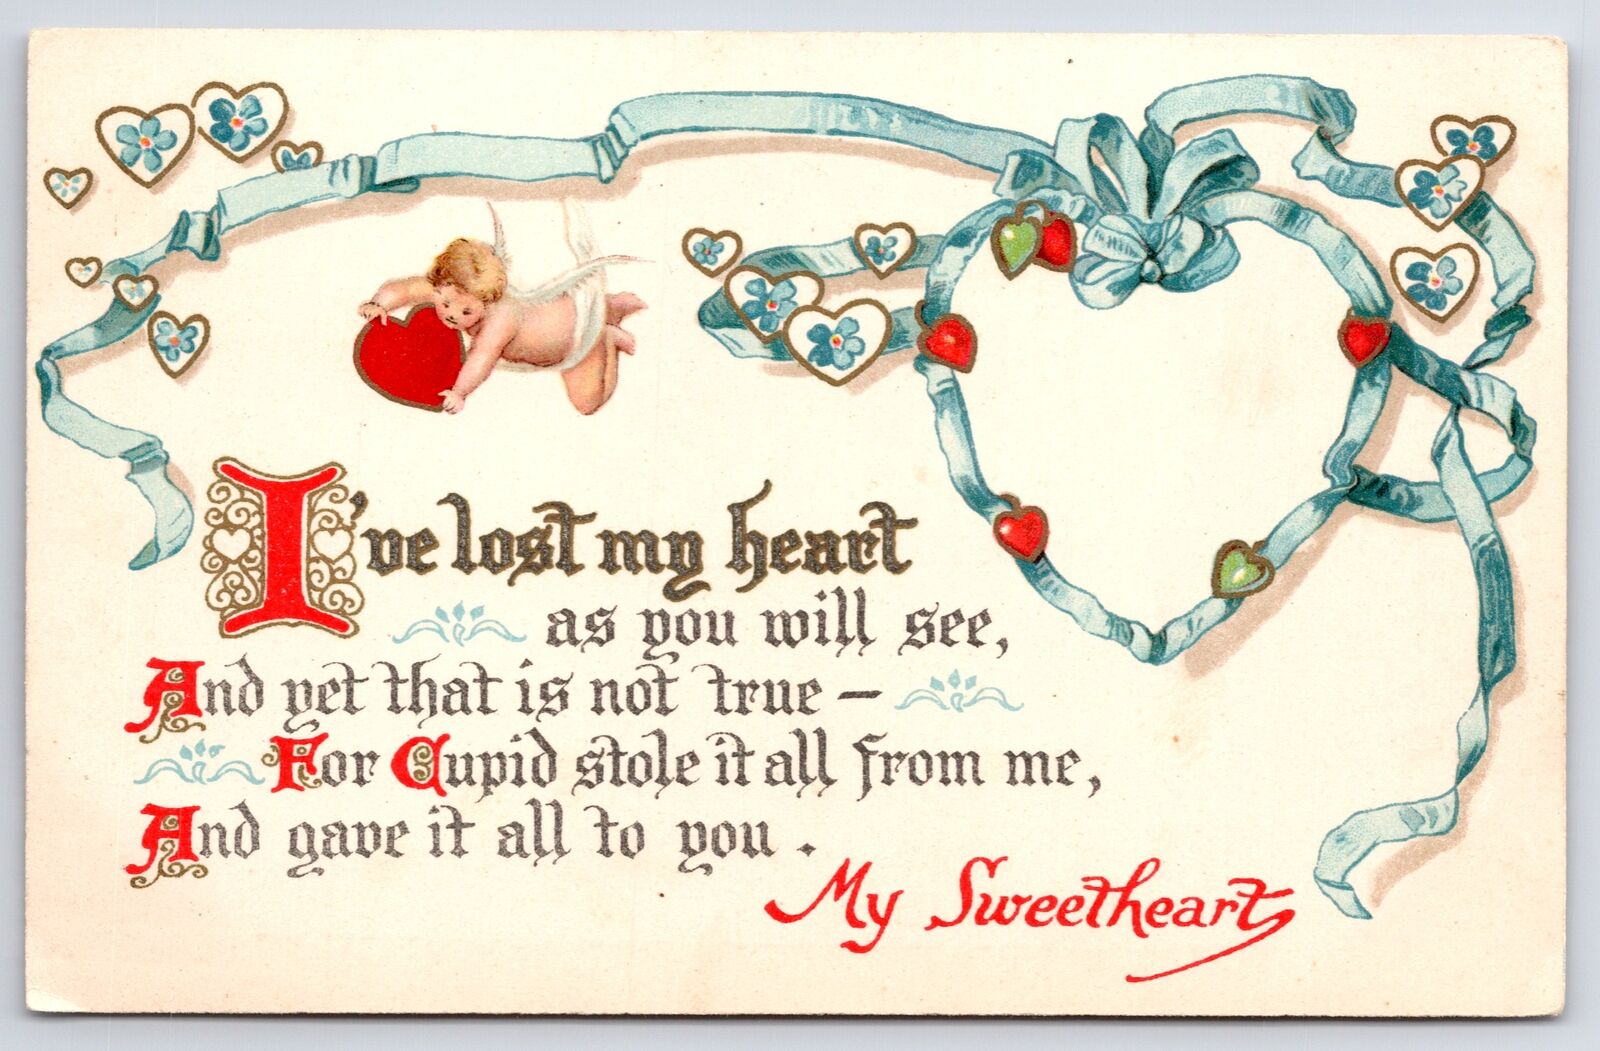 Ernest Nister Valentine Calligraphy~Cupid Stole my Heart~Gave~Blue Ribbons~1905